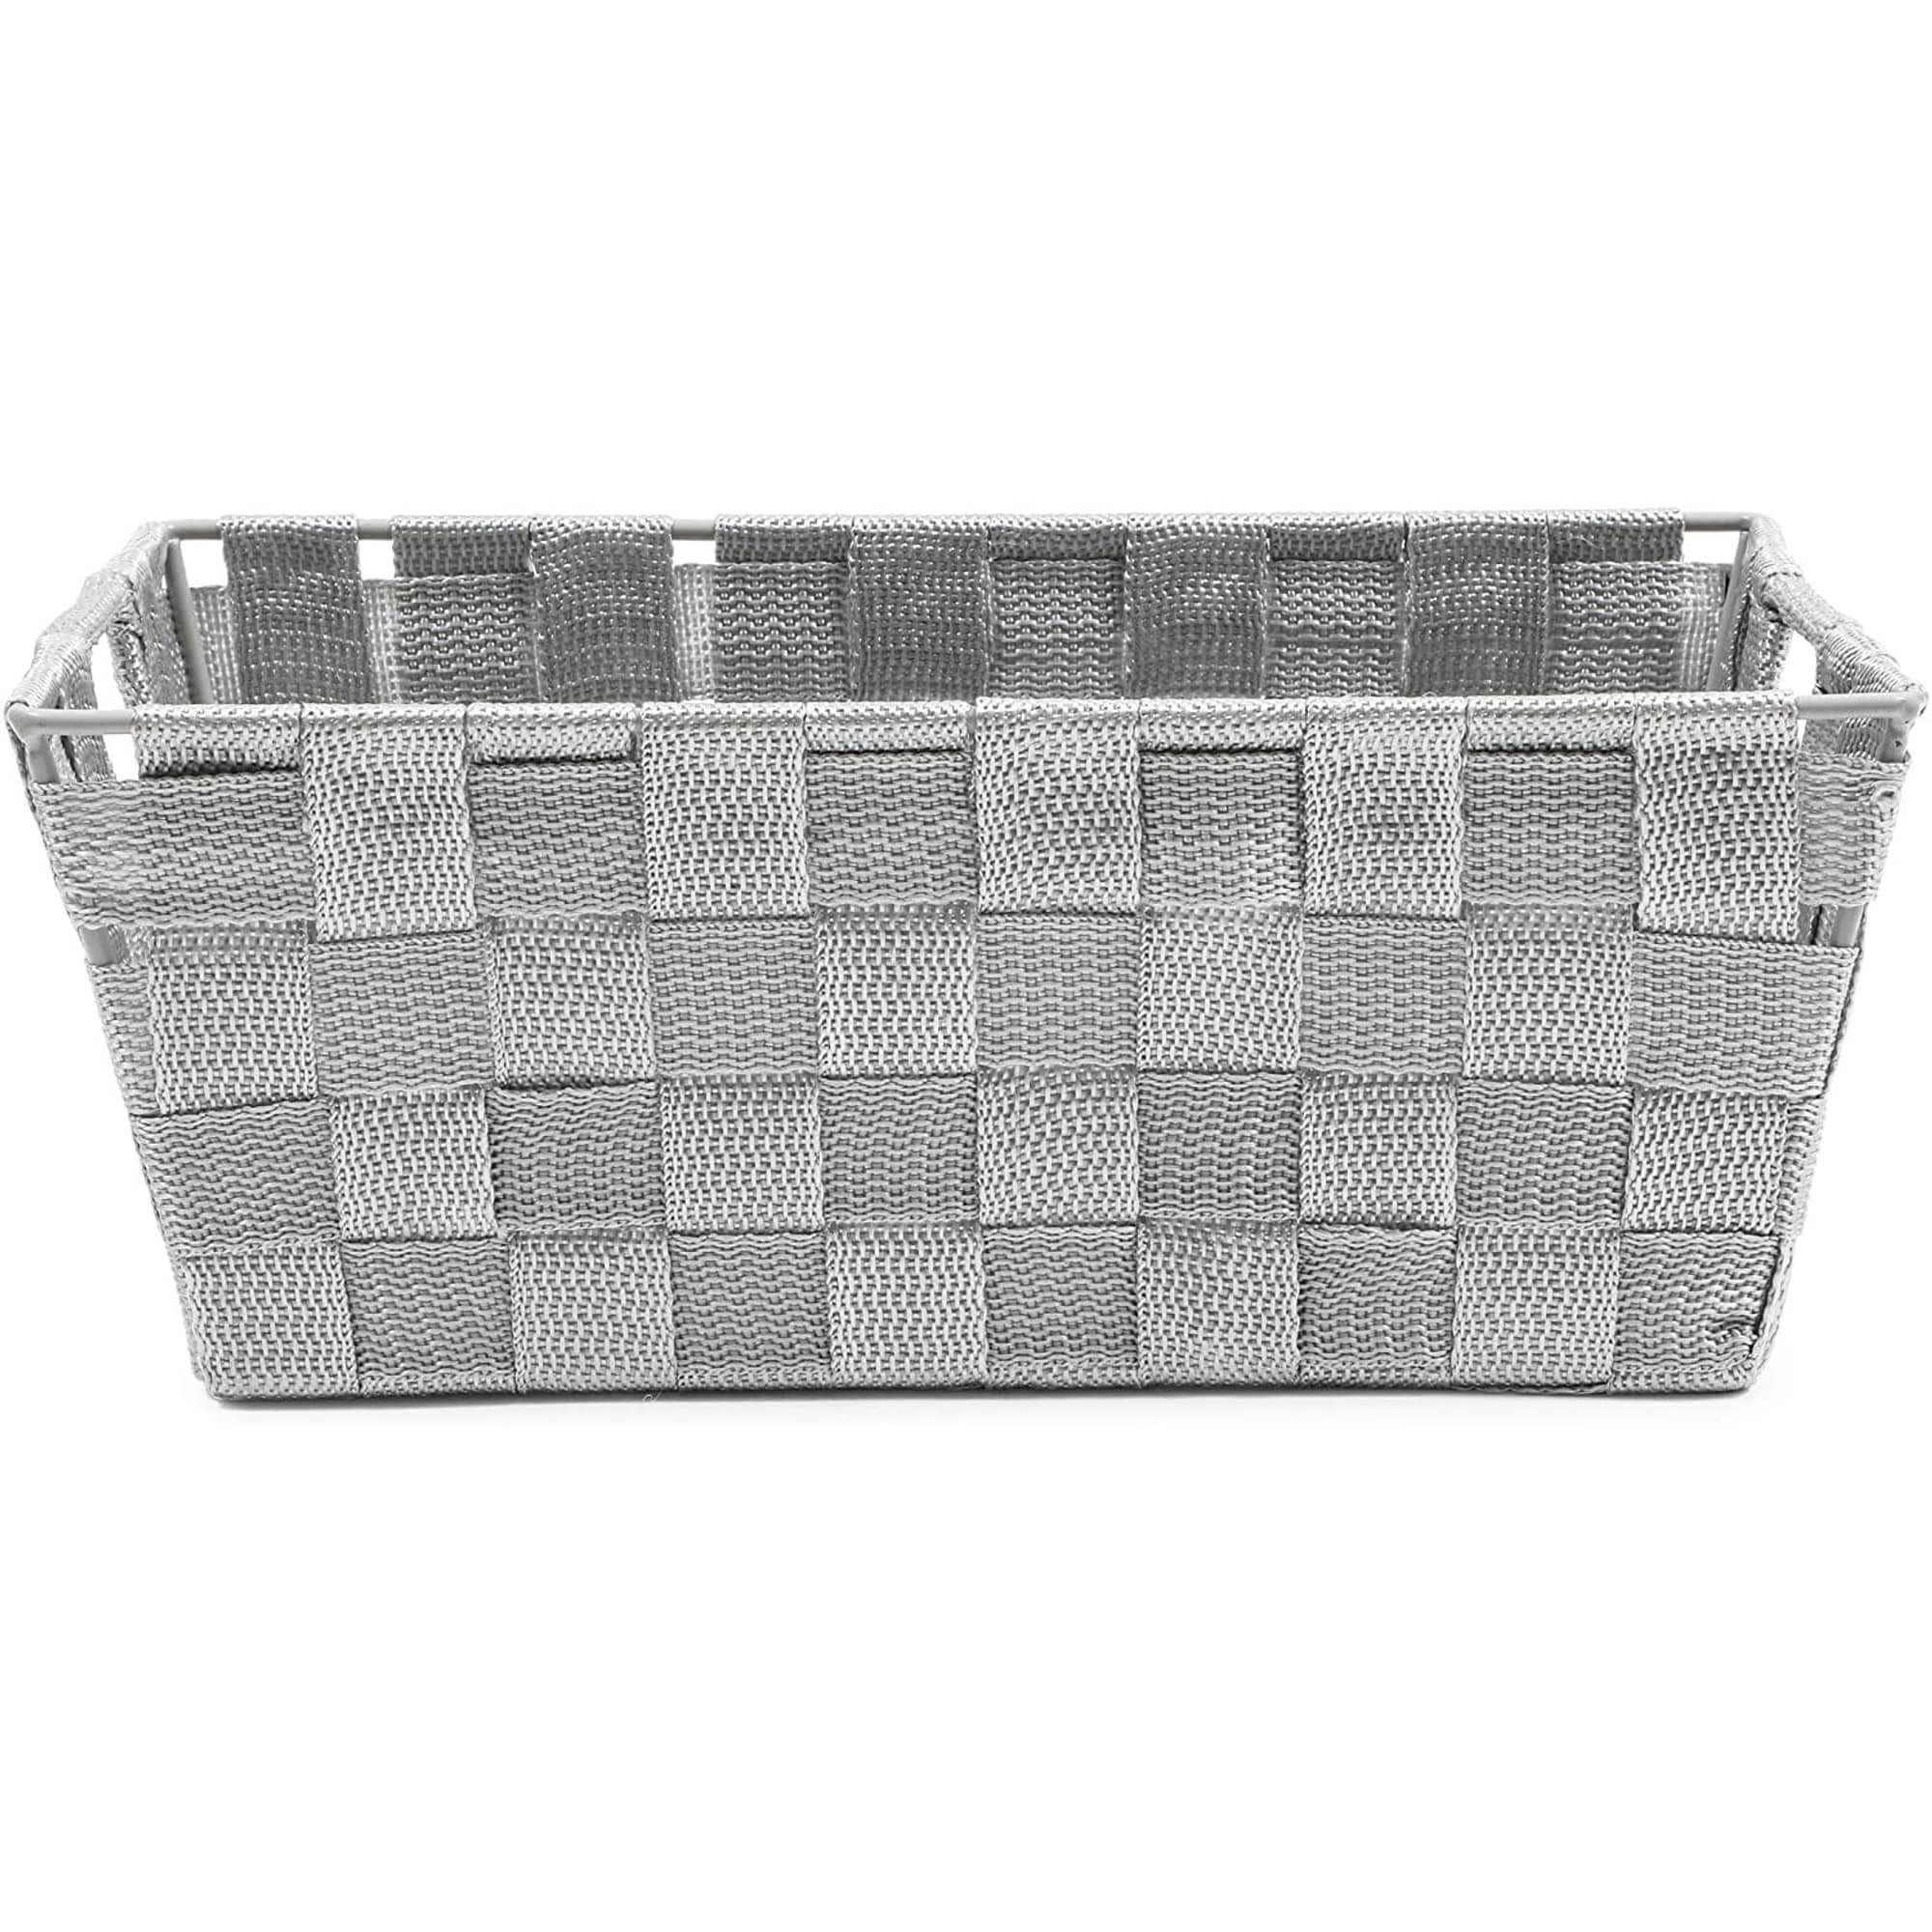 https://ak1.ostkcdn.com/images/products/is/images/direct/f4d83b9c9754822c861f36598ef1c6065e7fa2e4/Farmlyn-Creek-Grey-Woven-Basket-for-Bathroom%2C-Closet-and-Pantry-Storage-%2811.4-x-6.5-x-4.5-in%29.jpg